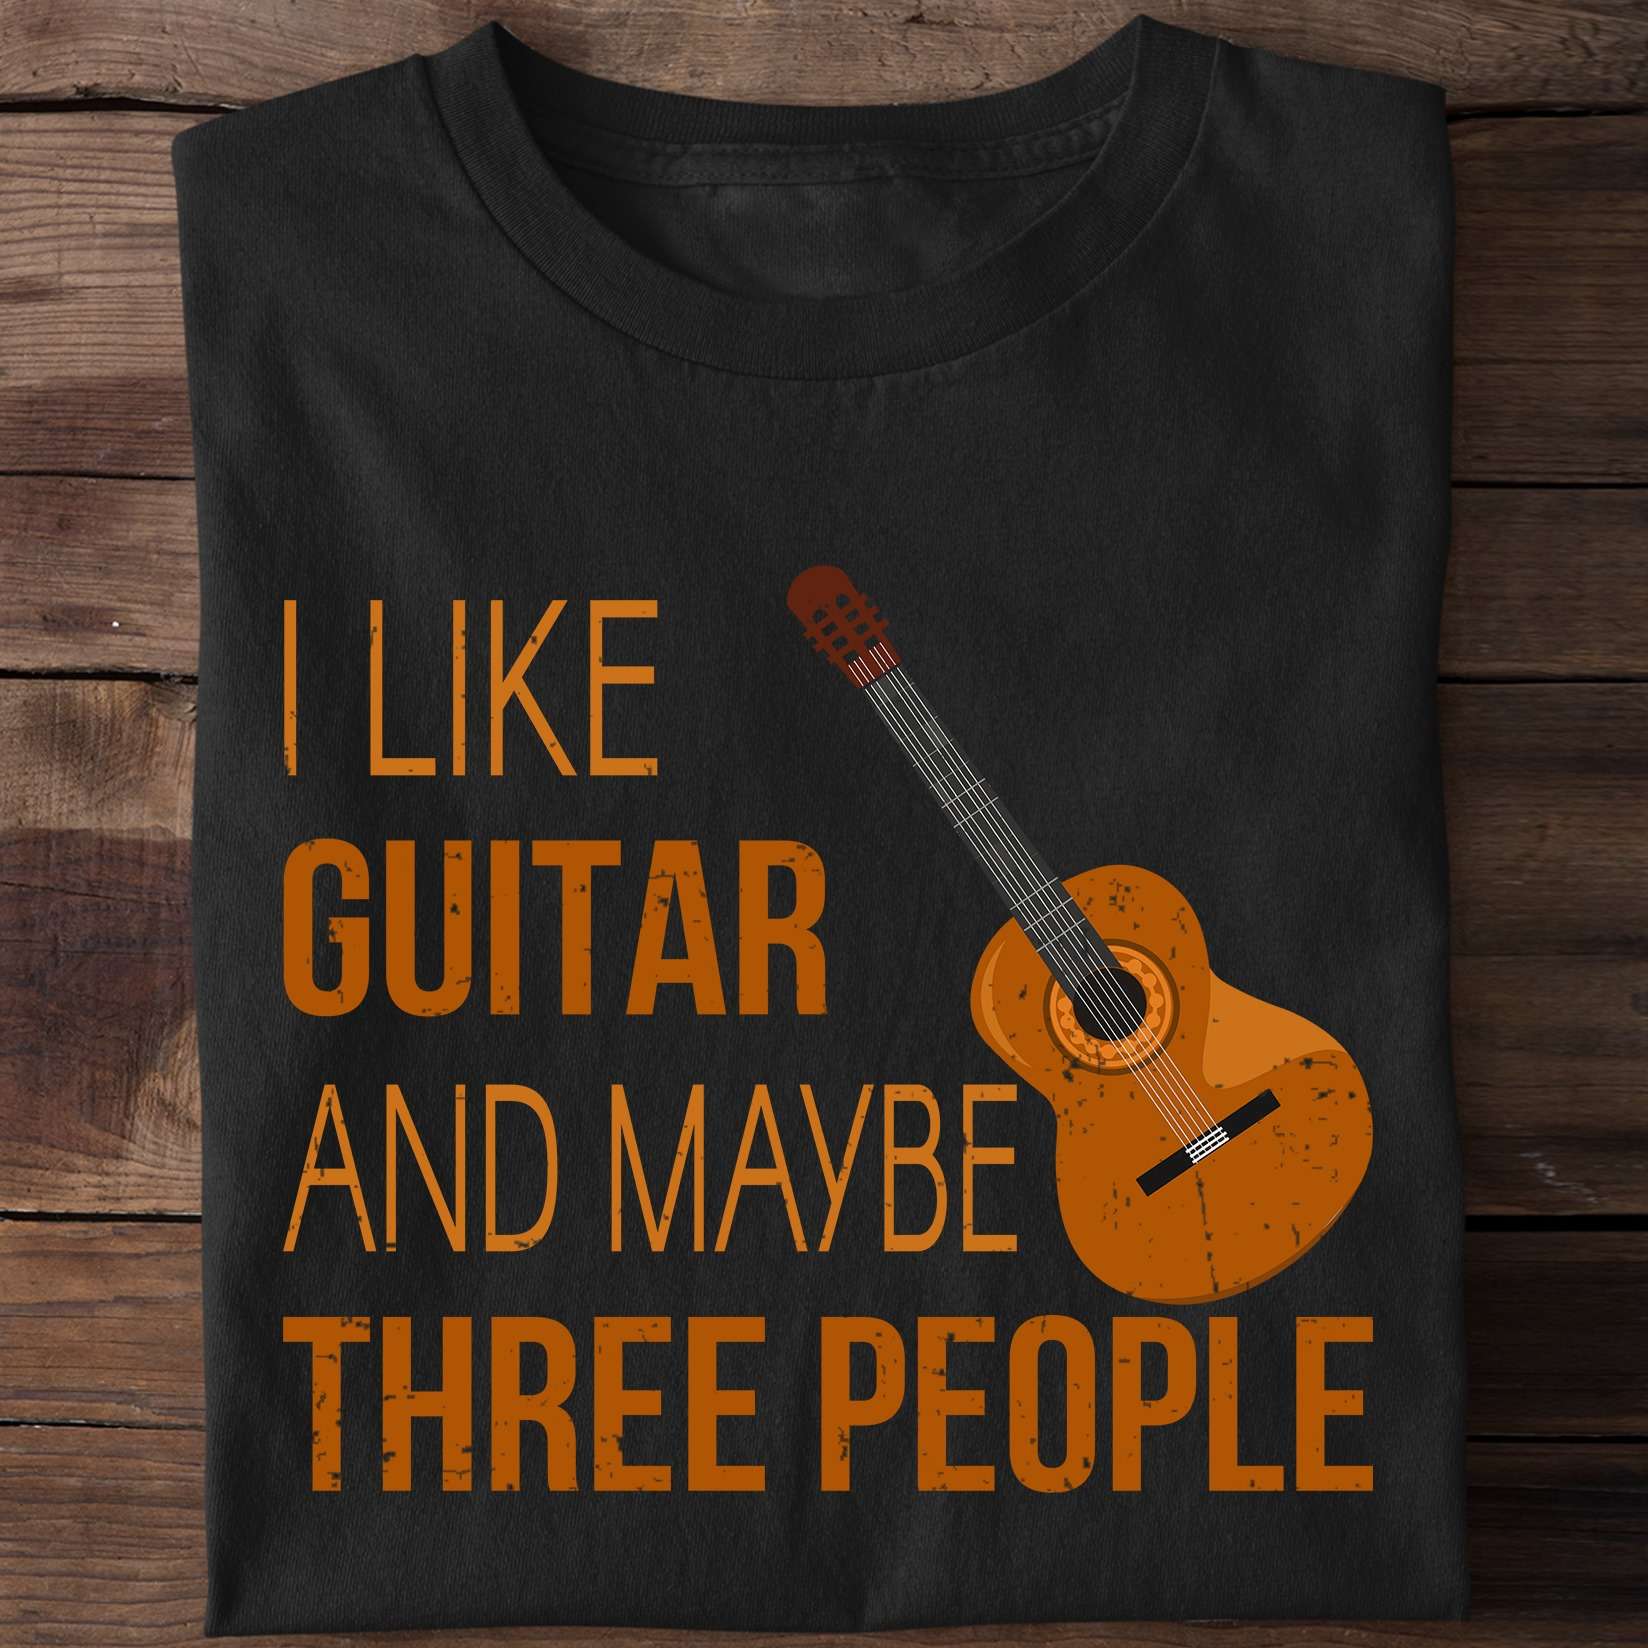 I like guitar and maybe three people - Gift for guitarists, love playing guitar